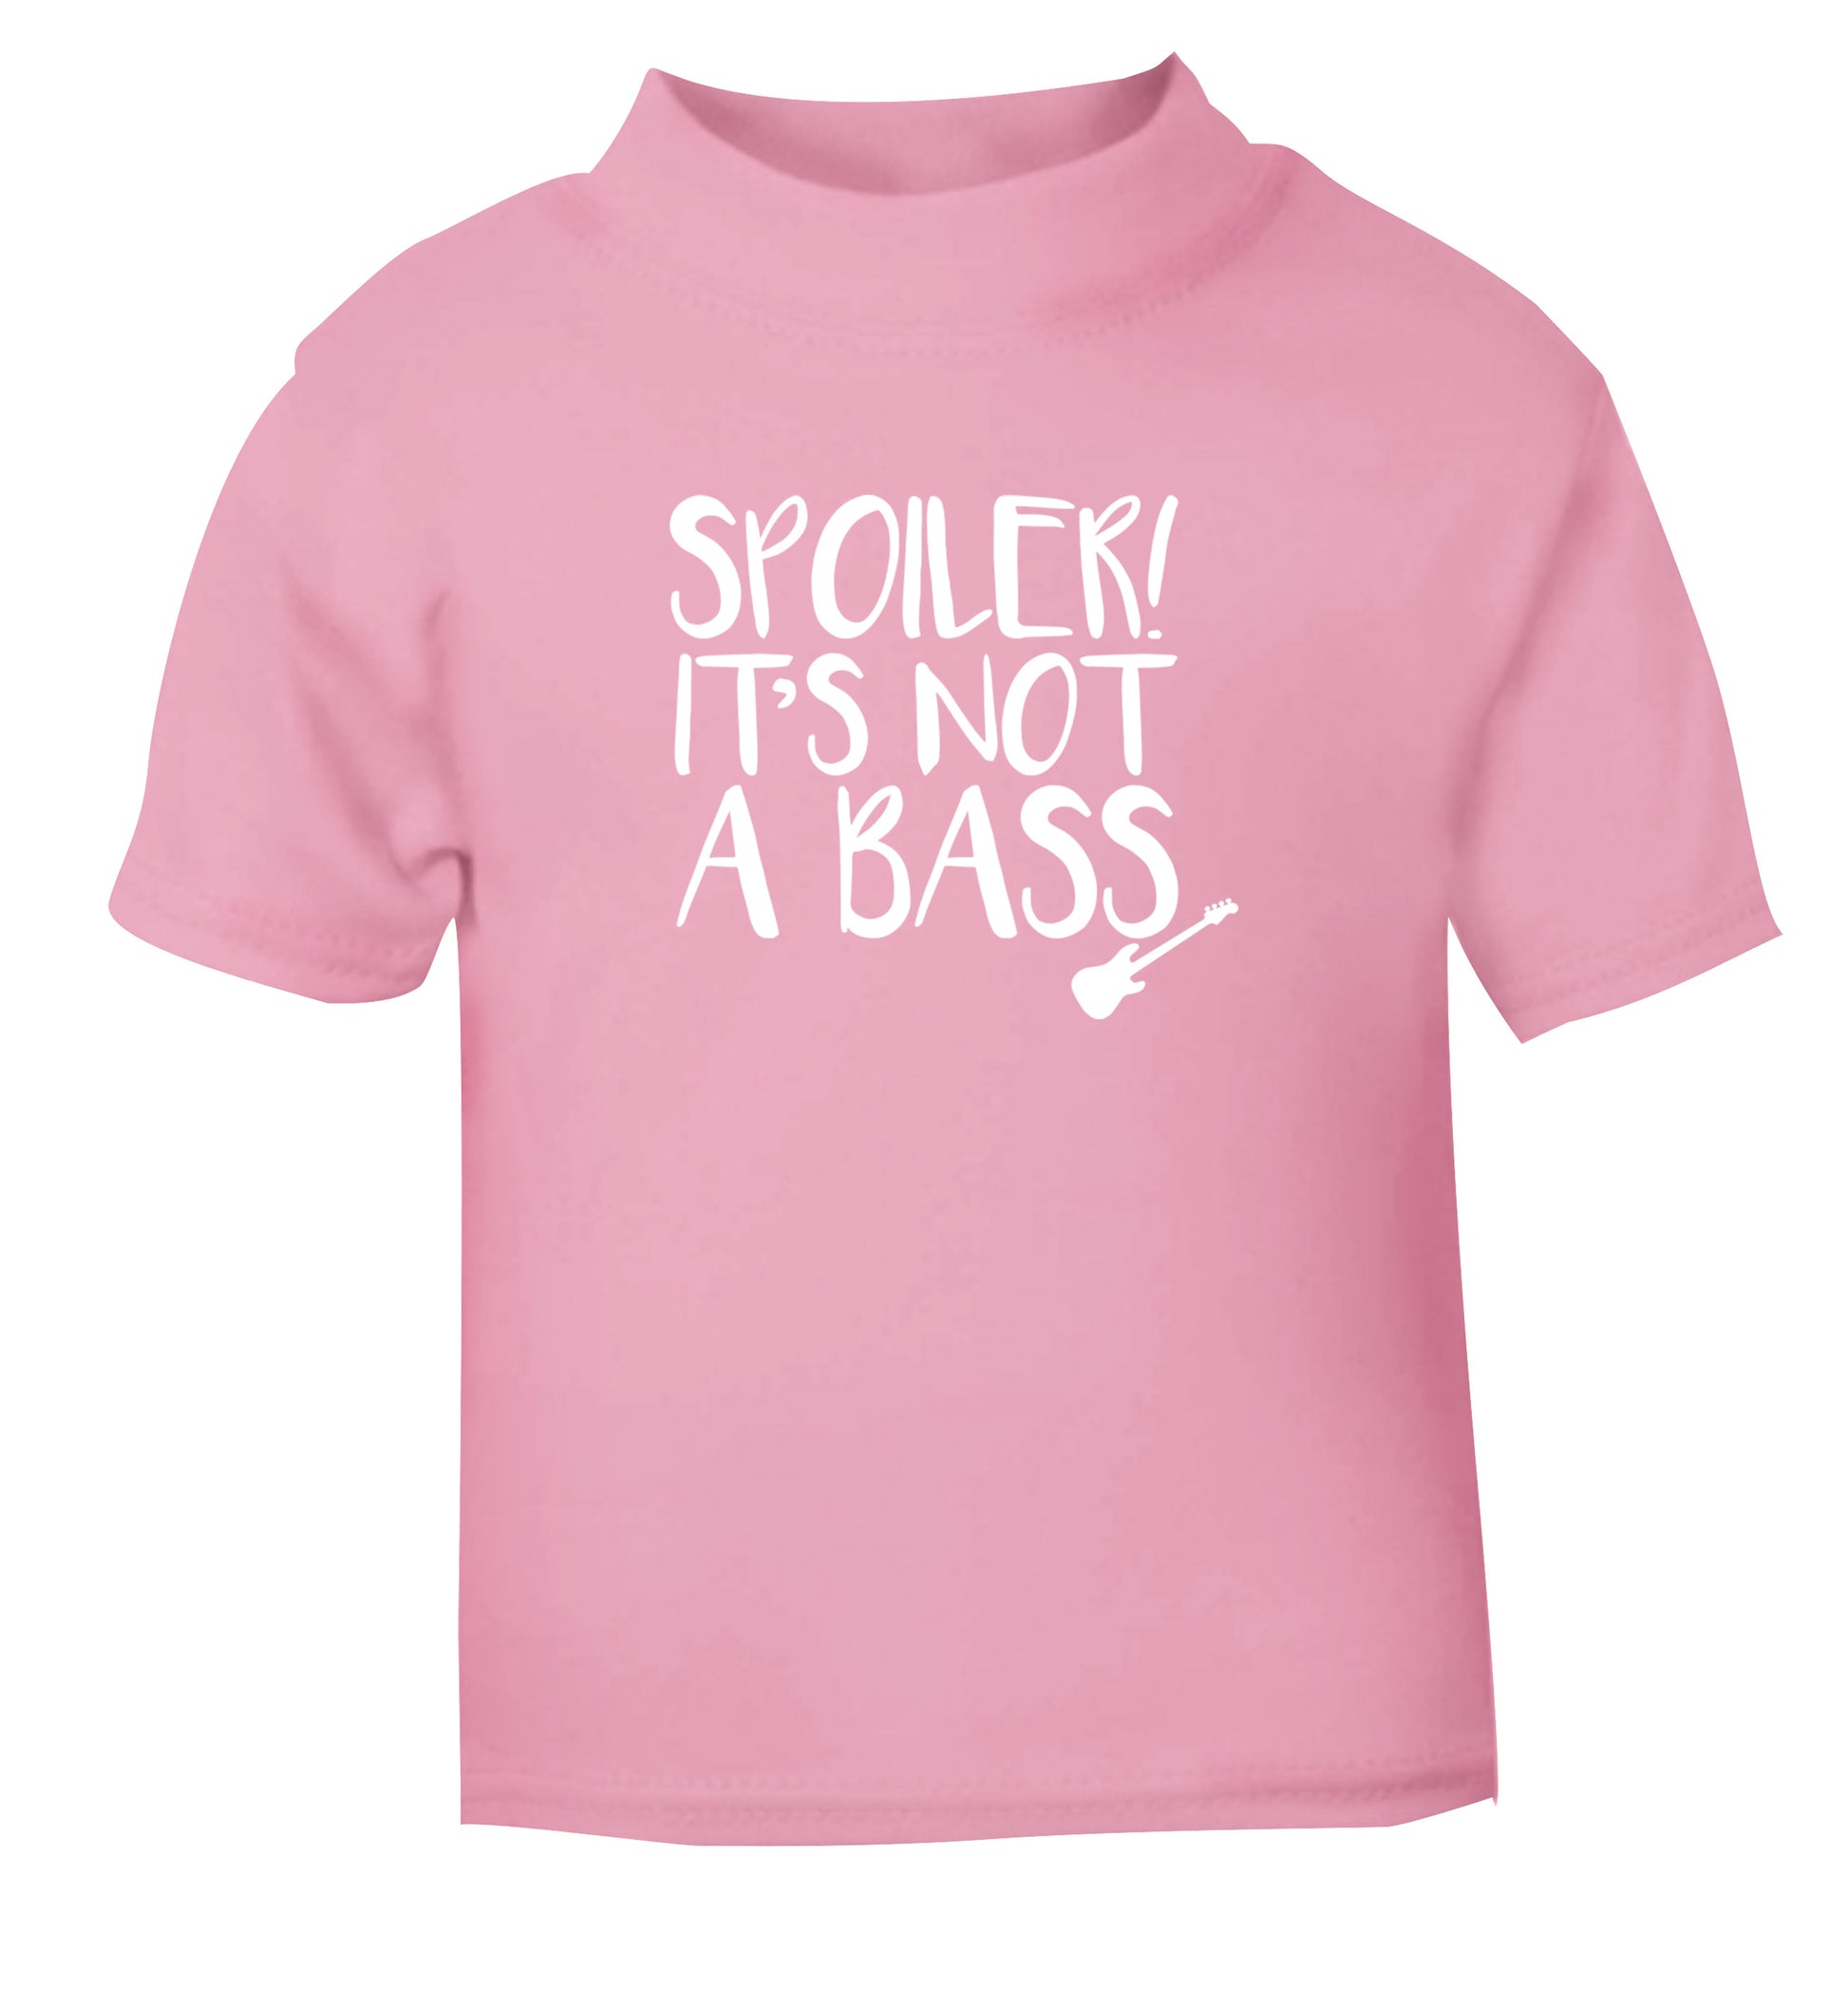 Spoiler it's not a bass light pink Baby Toddler Tshirt 2 Years